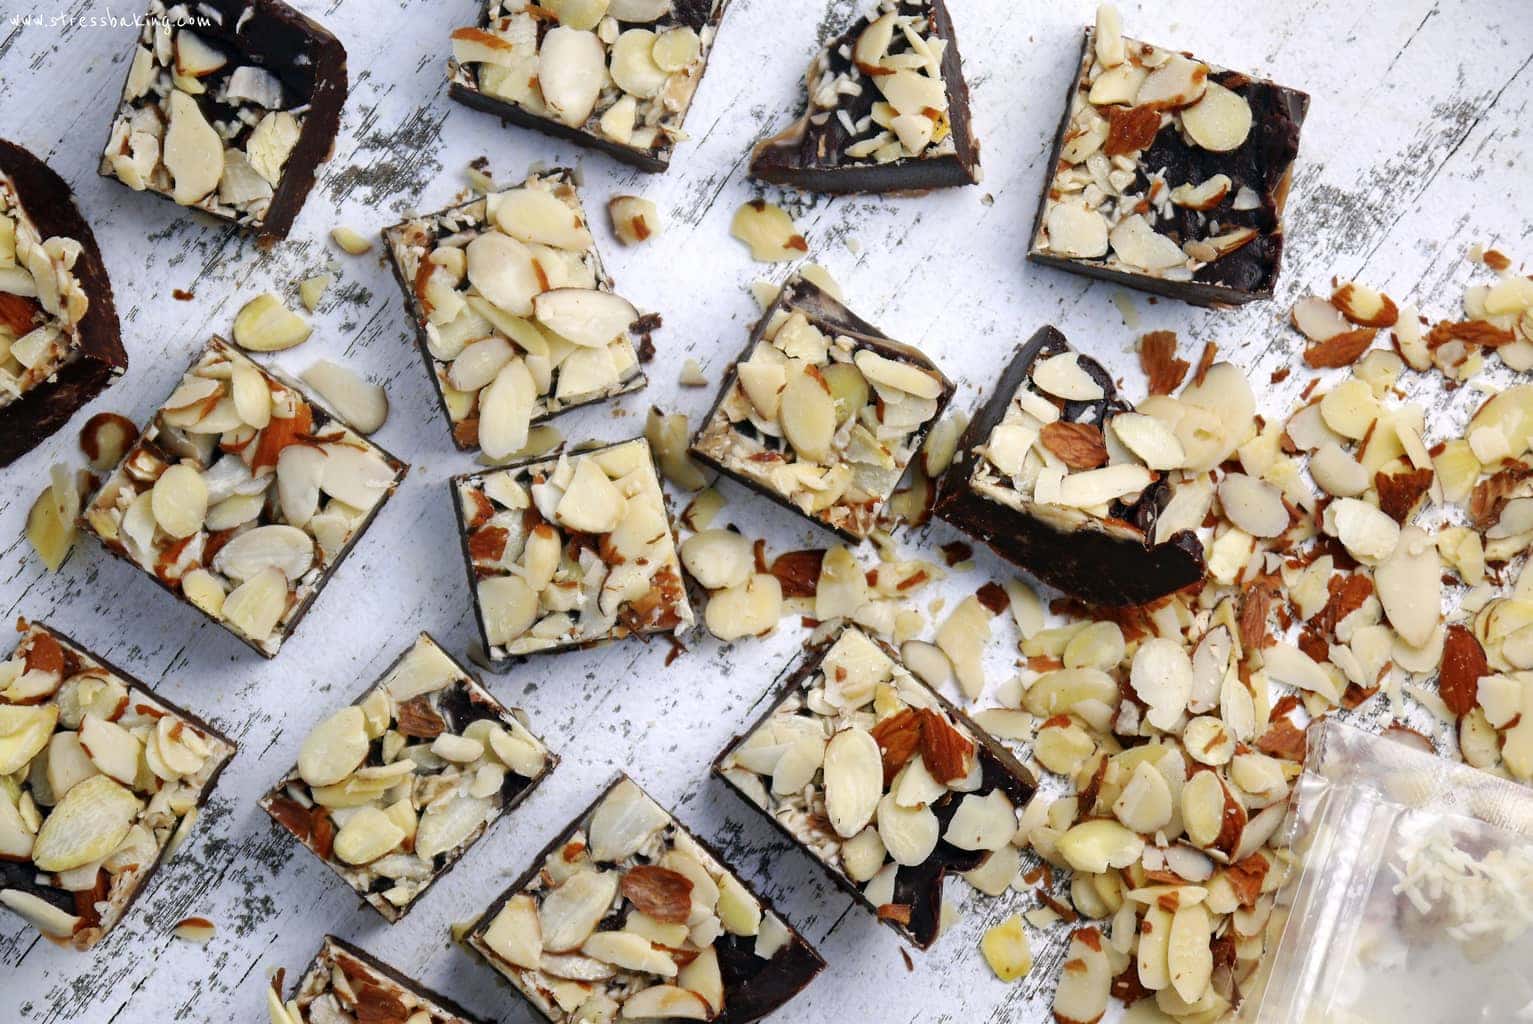 Squares of chocolate fudge topped with sliced almonds strewn about a distressed white surface